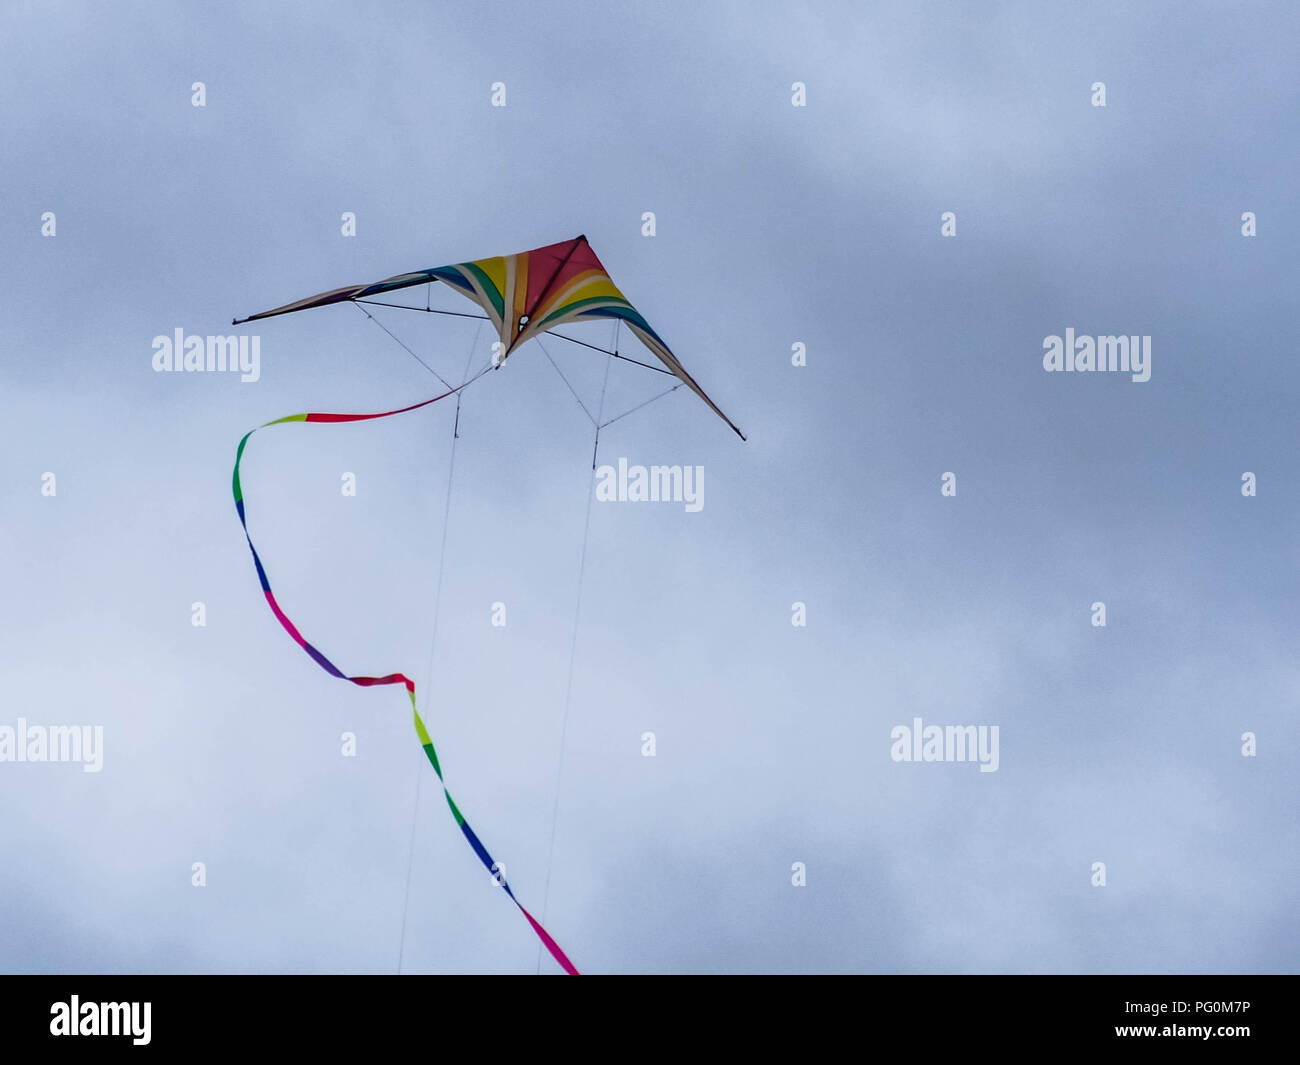 A Kite flying against a cloudy sky Stock Photo